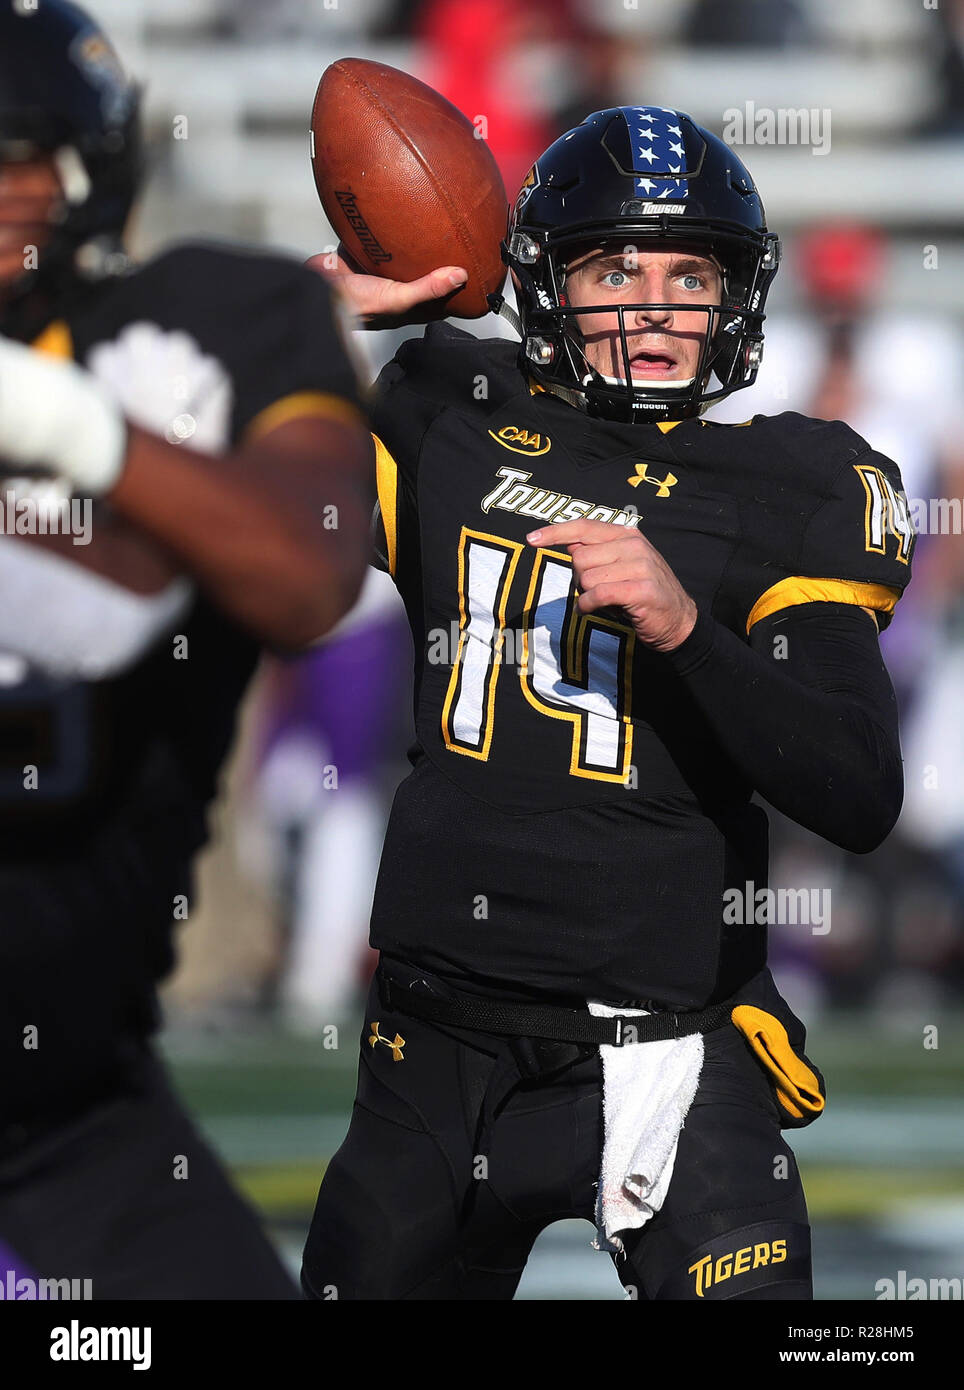 Towson QB Tom Flacco (14) looks to pass against James Madison in Colonial Athletic Association football action at Unitas Stadium in Towson, MD on November 17, 2018. The James Madison Dukes defeated the Towson Tigers 38-17. Photo/ Mike Buscher/ Cal Sport Media Stock Photo